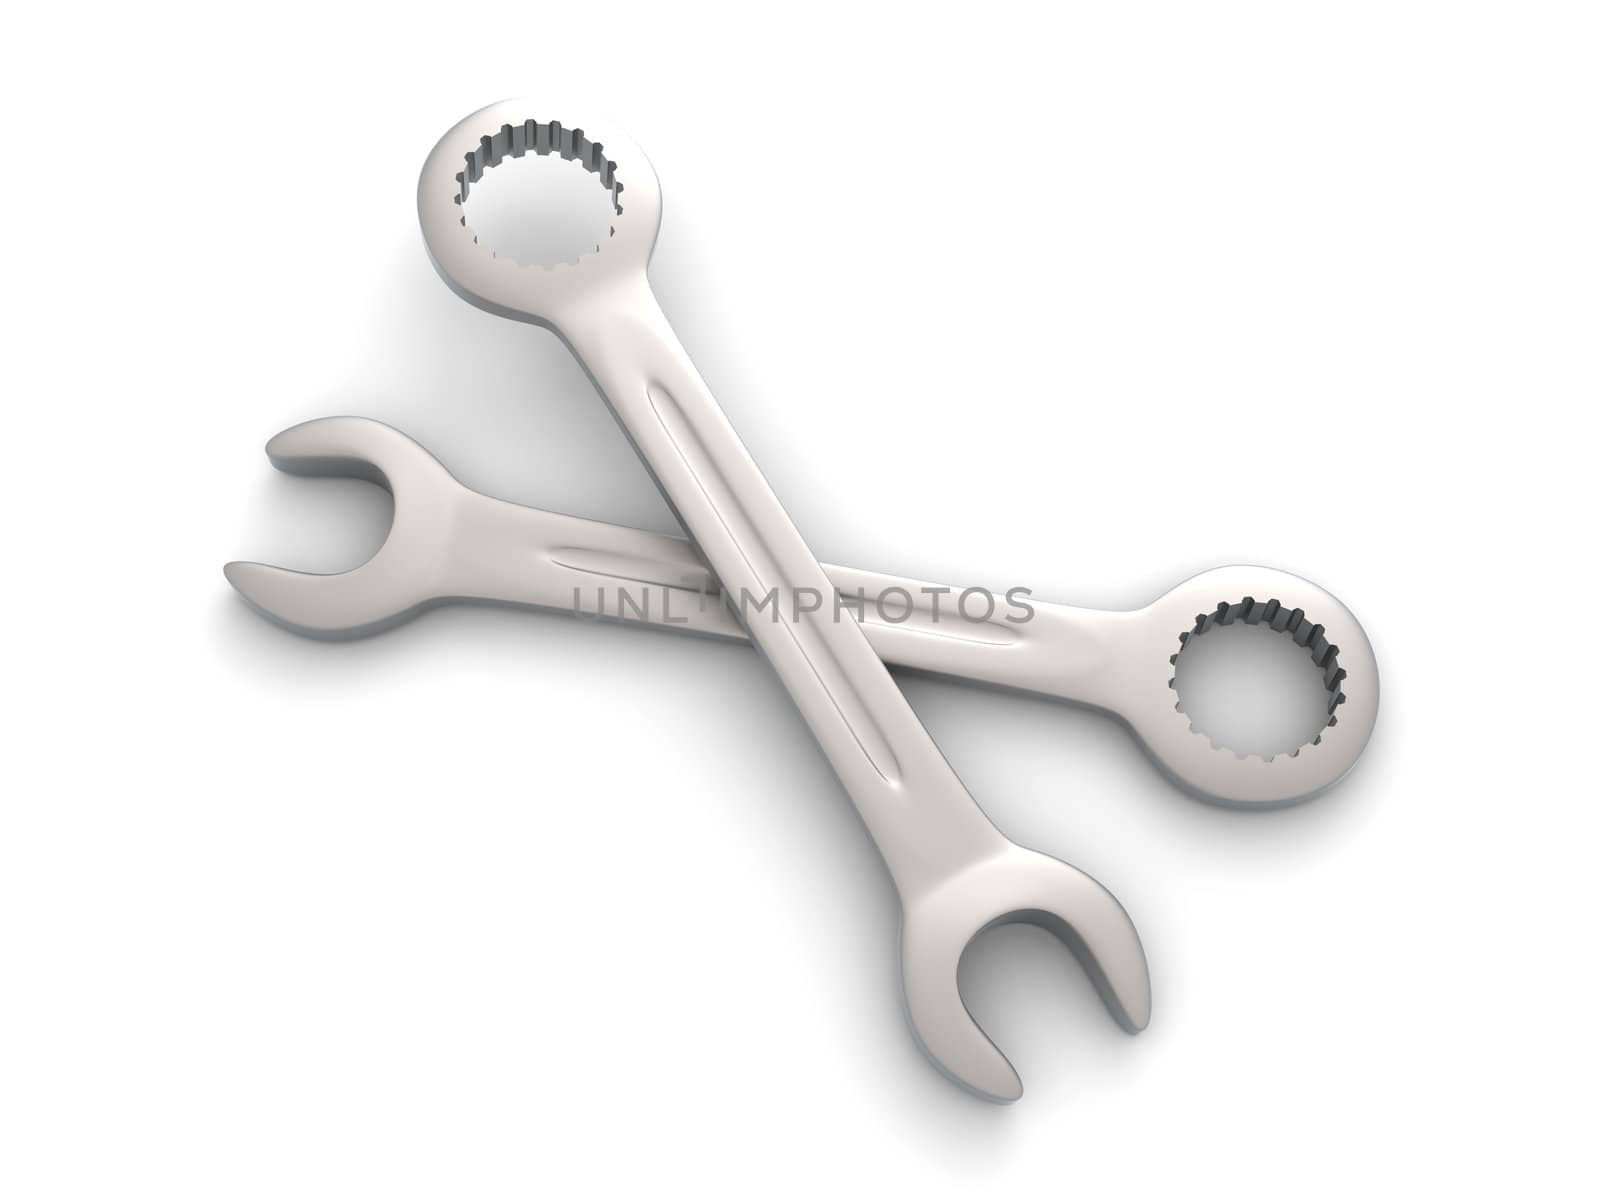 Wrenches by Spectral